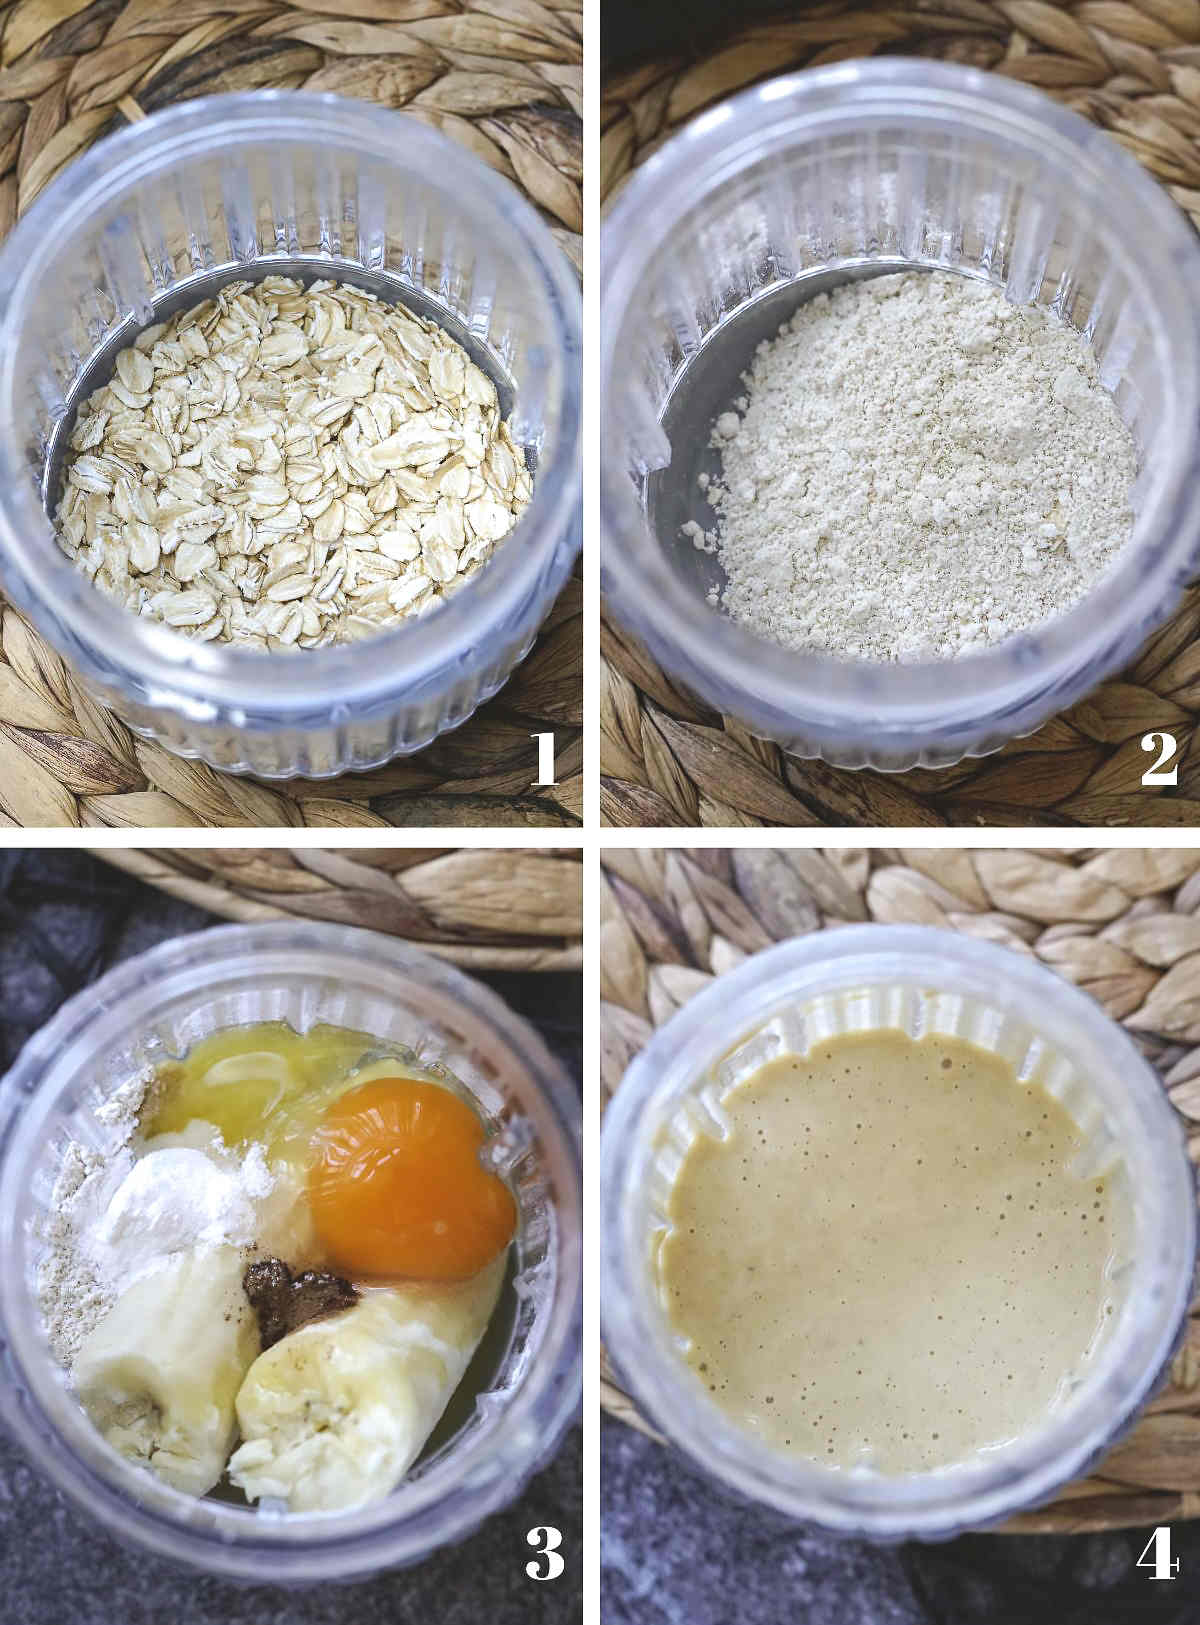 Process shots showing how to make banana oat pancakes for baby, toddler.